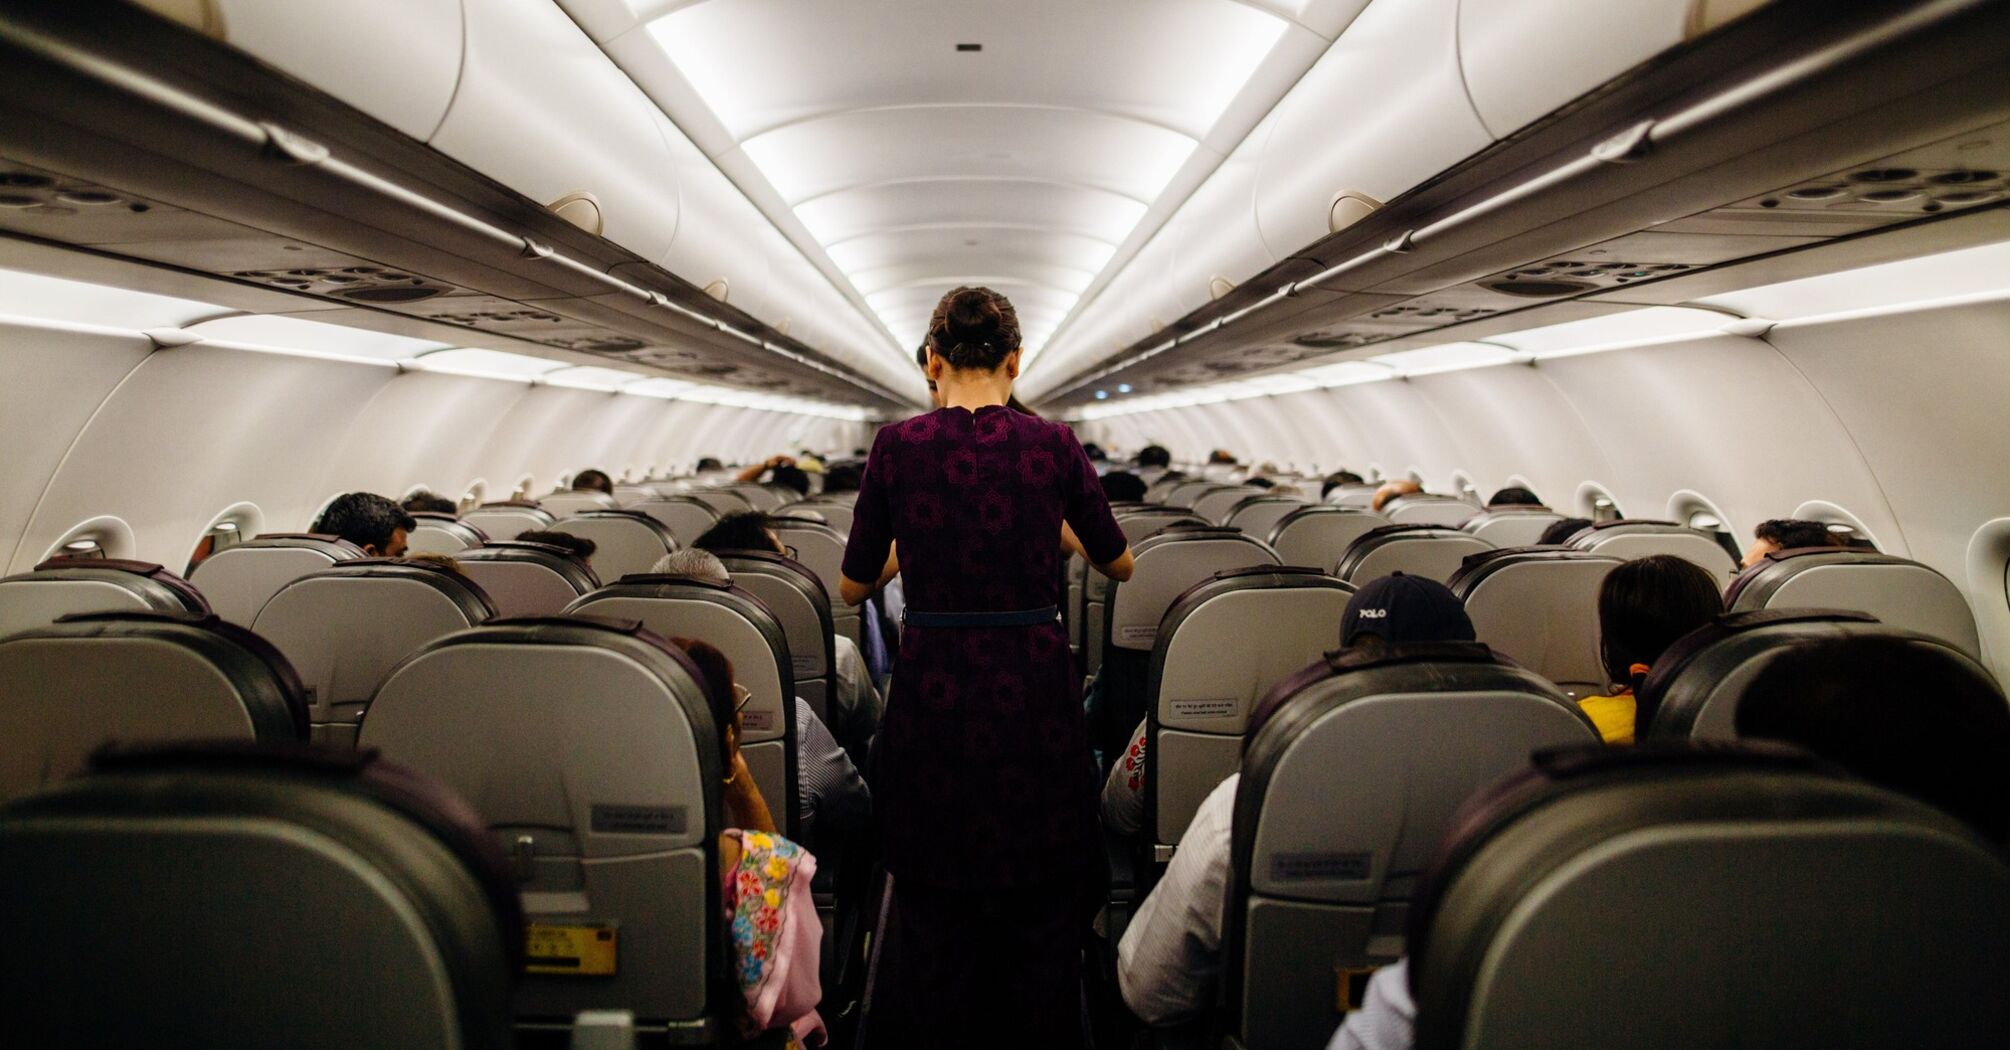 The flight attendant talked about the Brits who cause her discomfort and make her unwilling to serve them